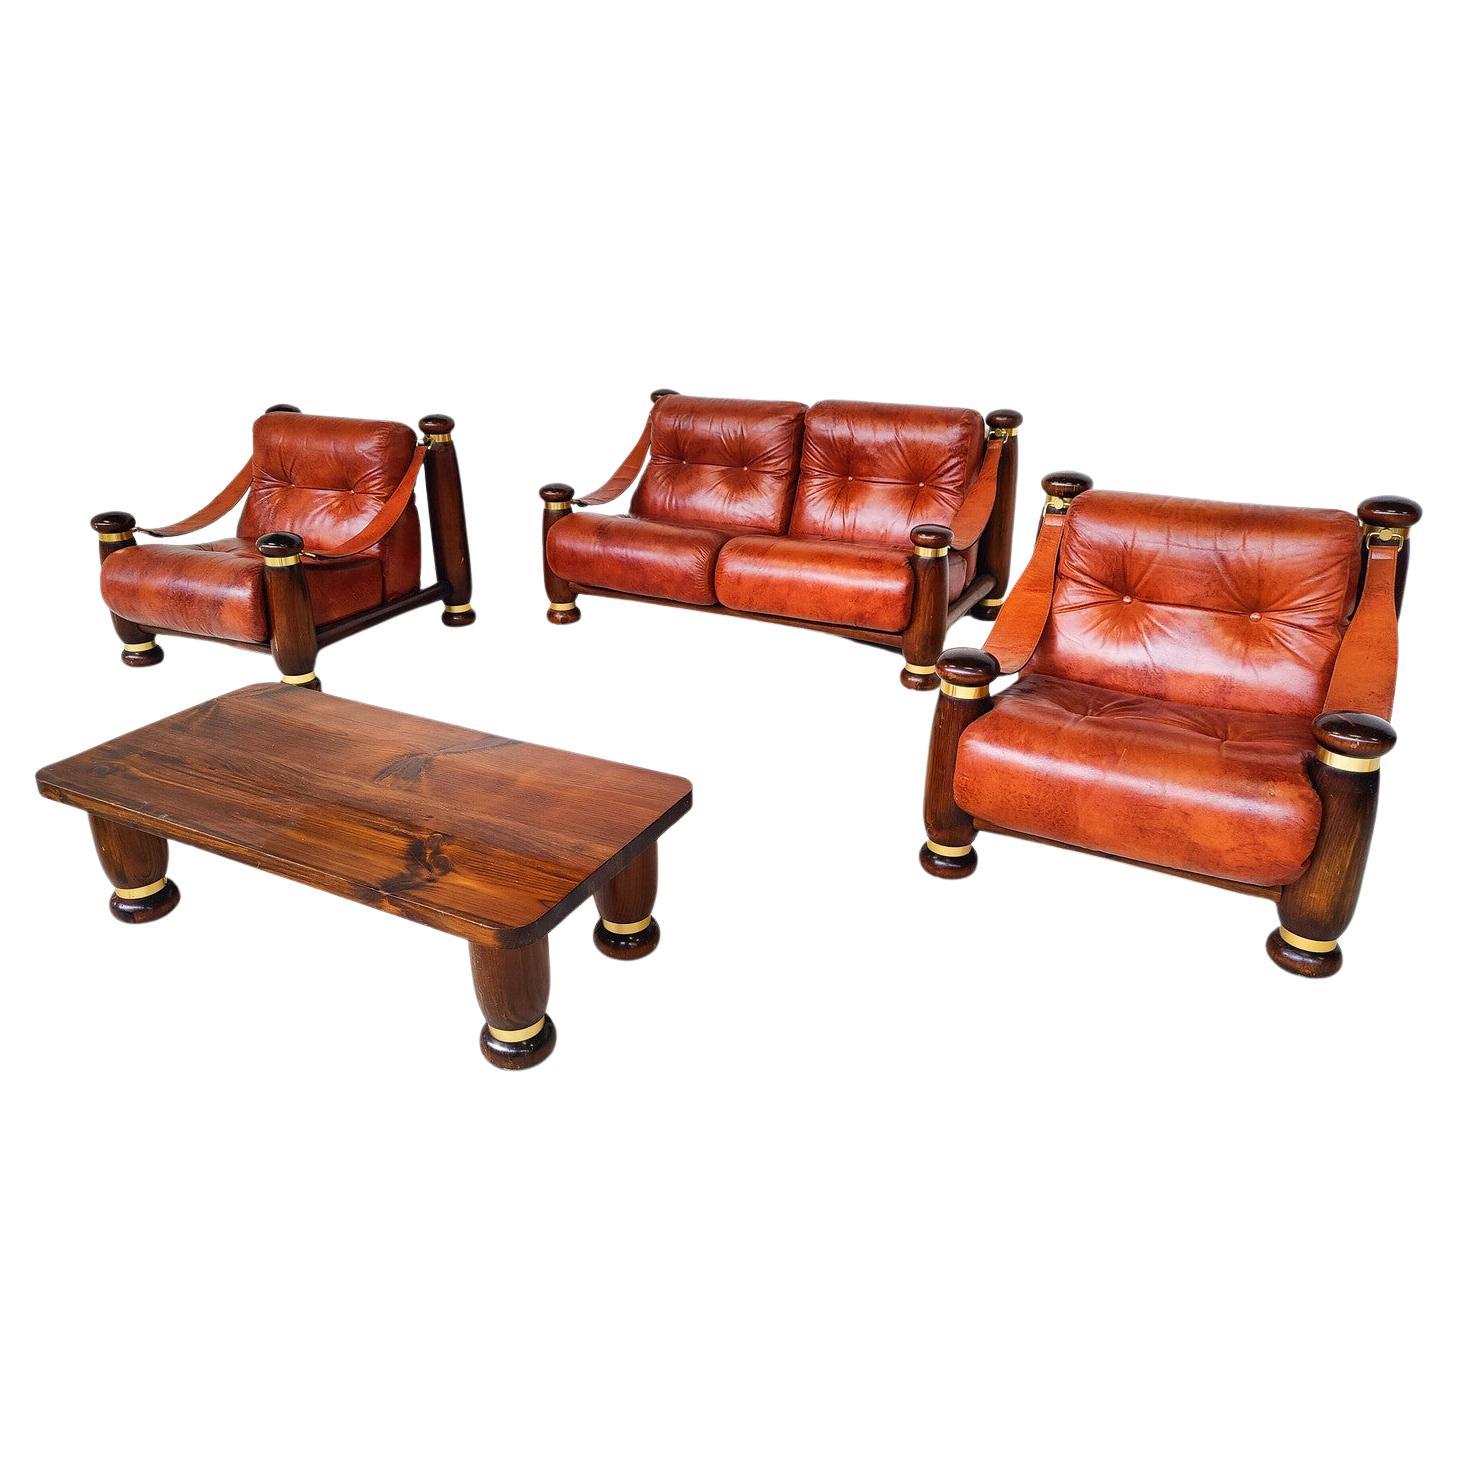 Mid-Century Modern Seating Set, Leather and Wood, Italy, 1970s, Original Leather For Sale